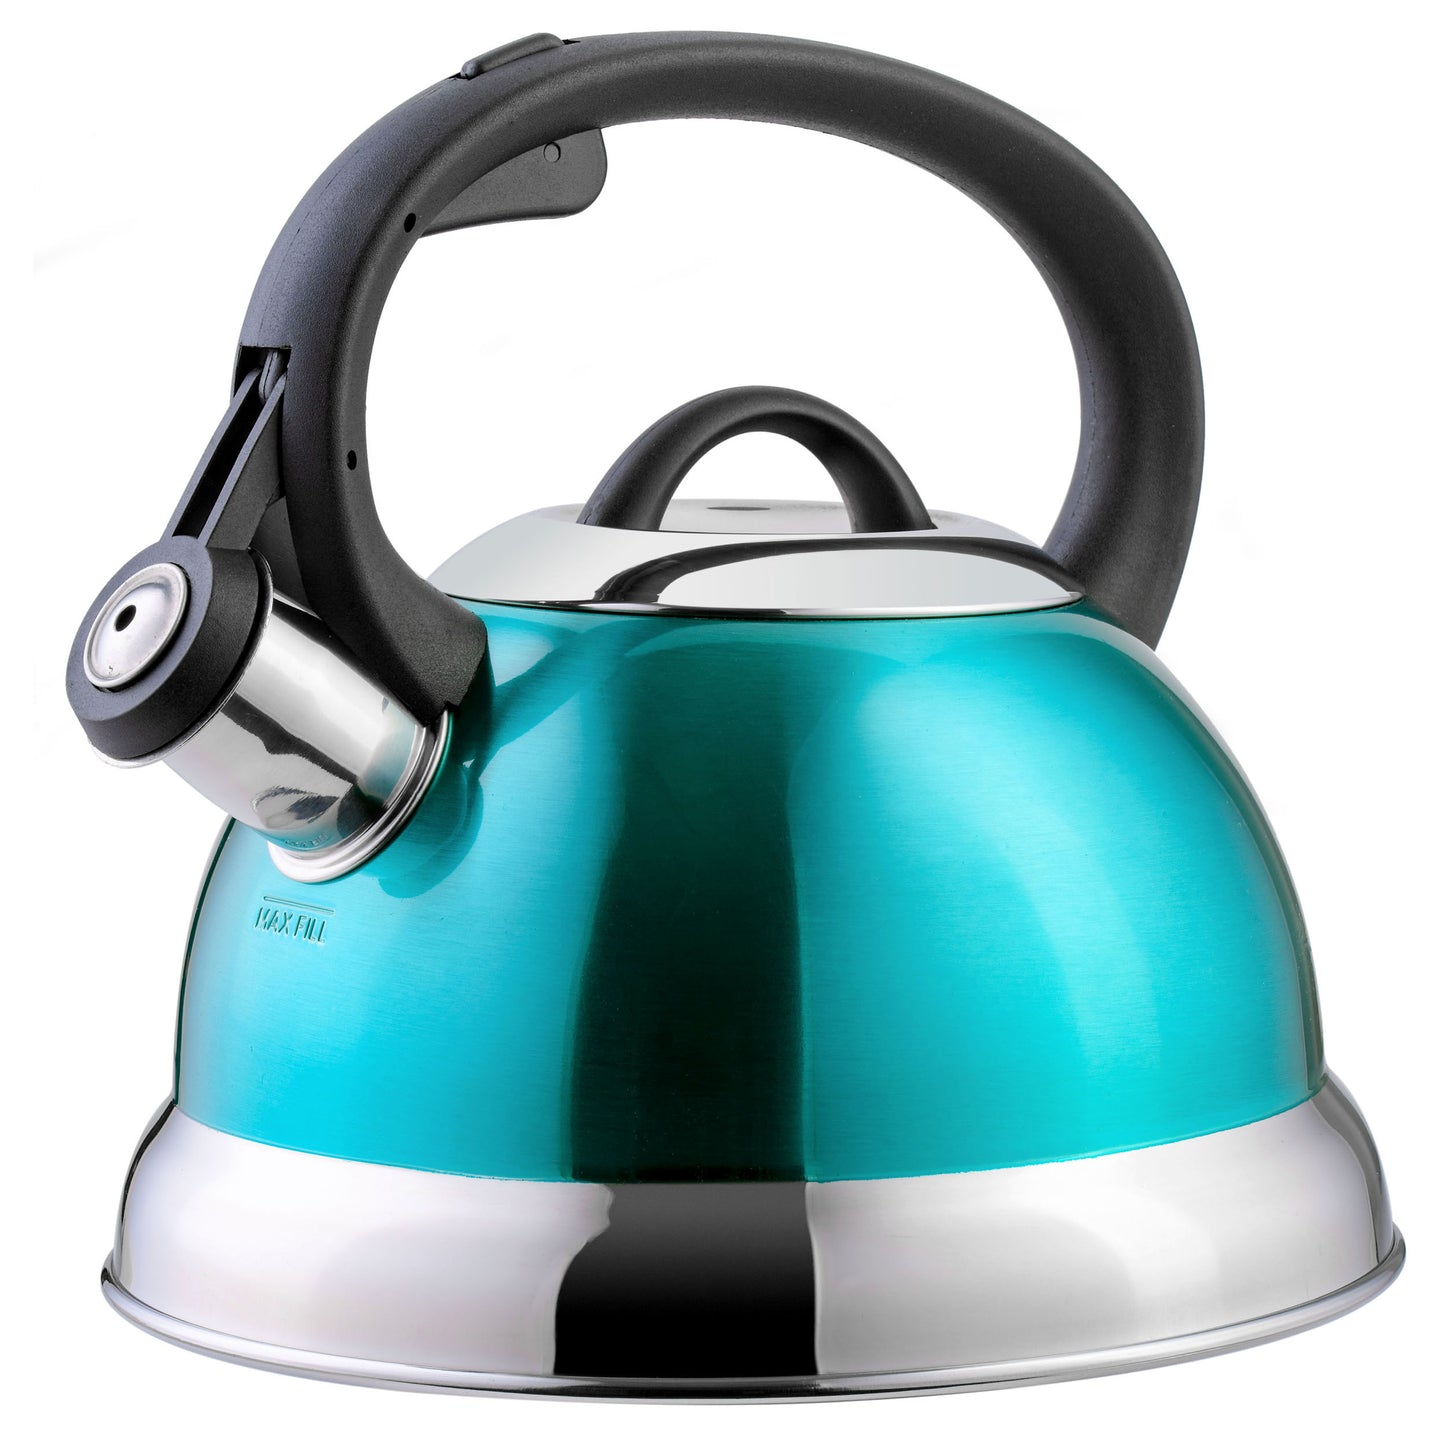 Mr. Coffee Mr. Coffee Flintshire 1.75 Quart Whistling Stovetop Tea Kettle in Turquoise